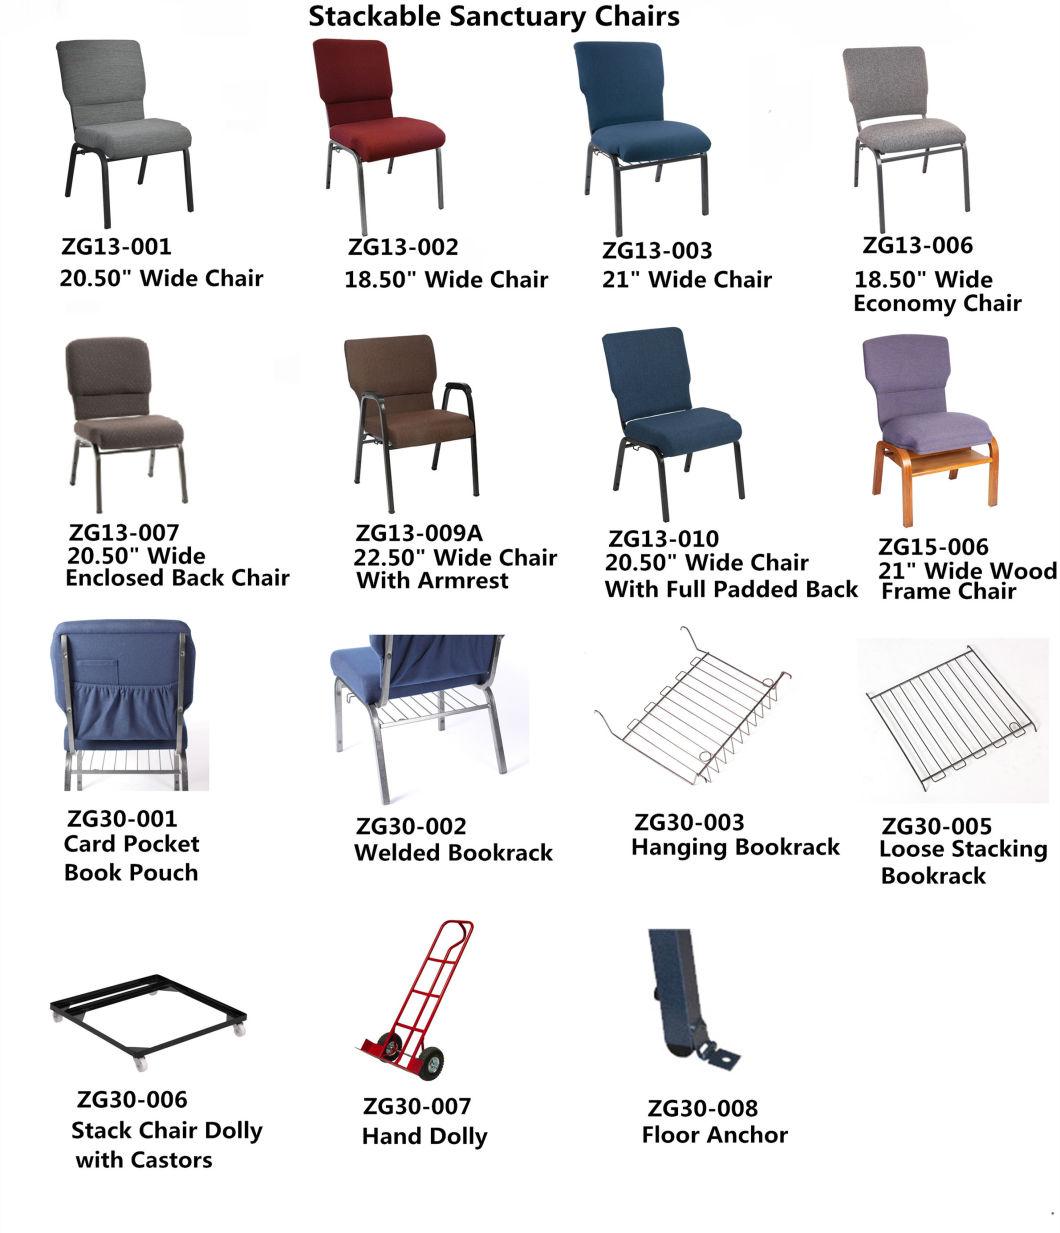 Professional Manufacturer of 18 Inch Wide Maroon Fabric Economy Metal Worship Chair  (ZG13-006)